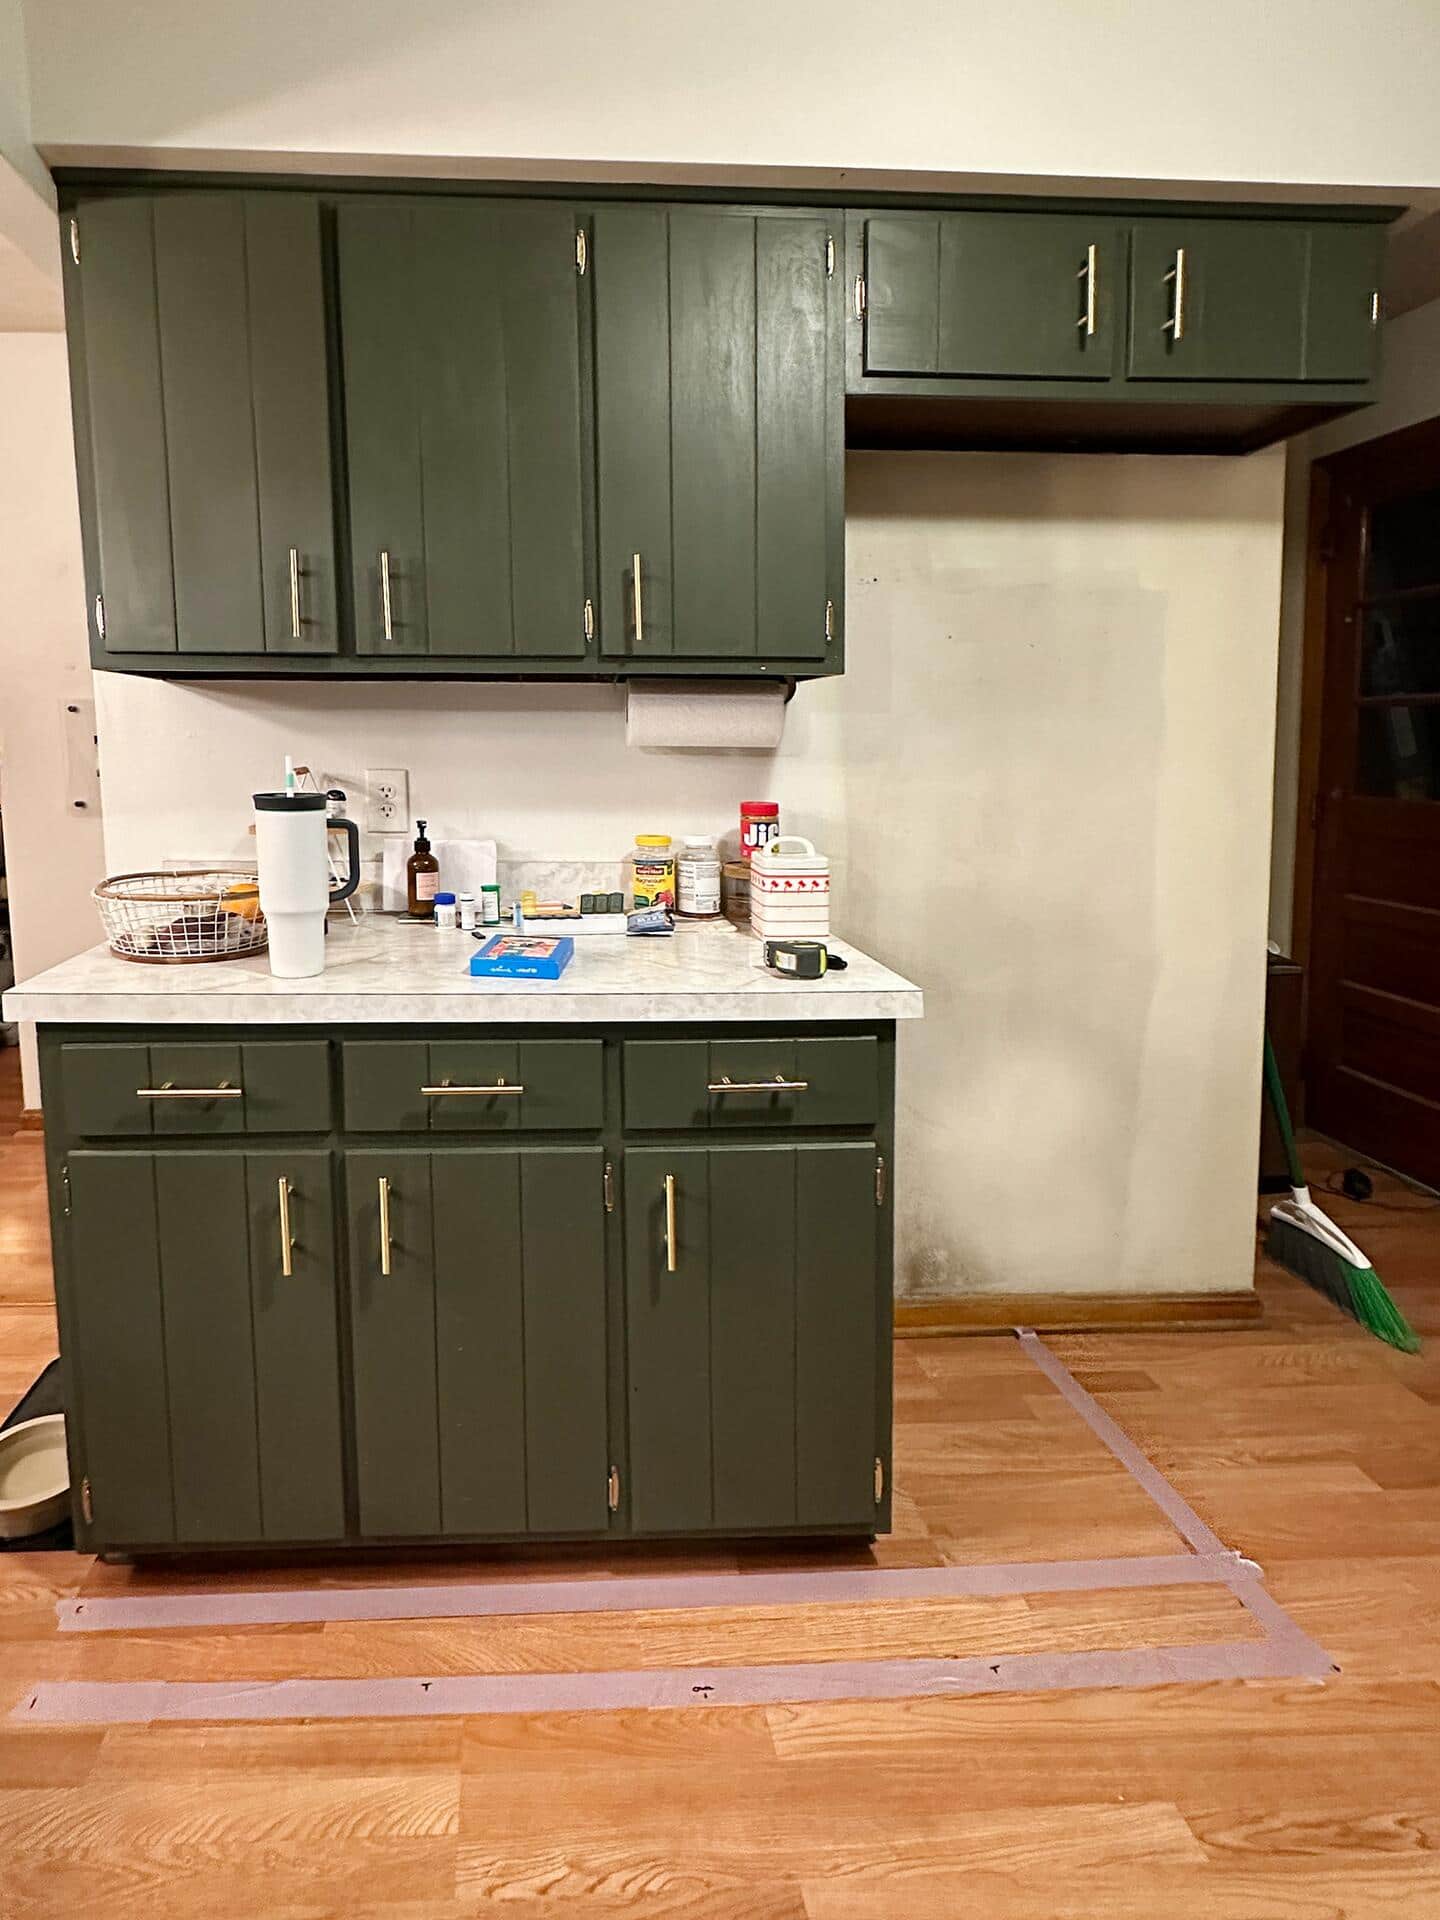  A before photo of Vanessa's kitchen and cabinet spaces, with green cabinetry as they start to make renovations through tape lines on the floor to draw out the new space.